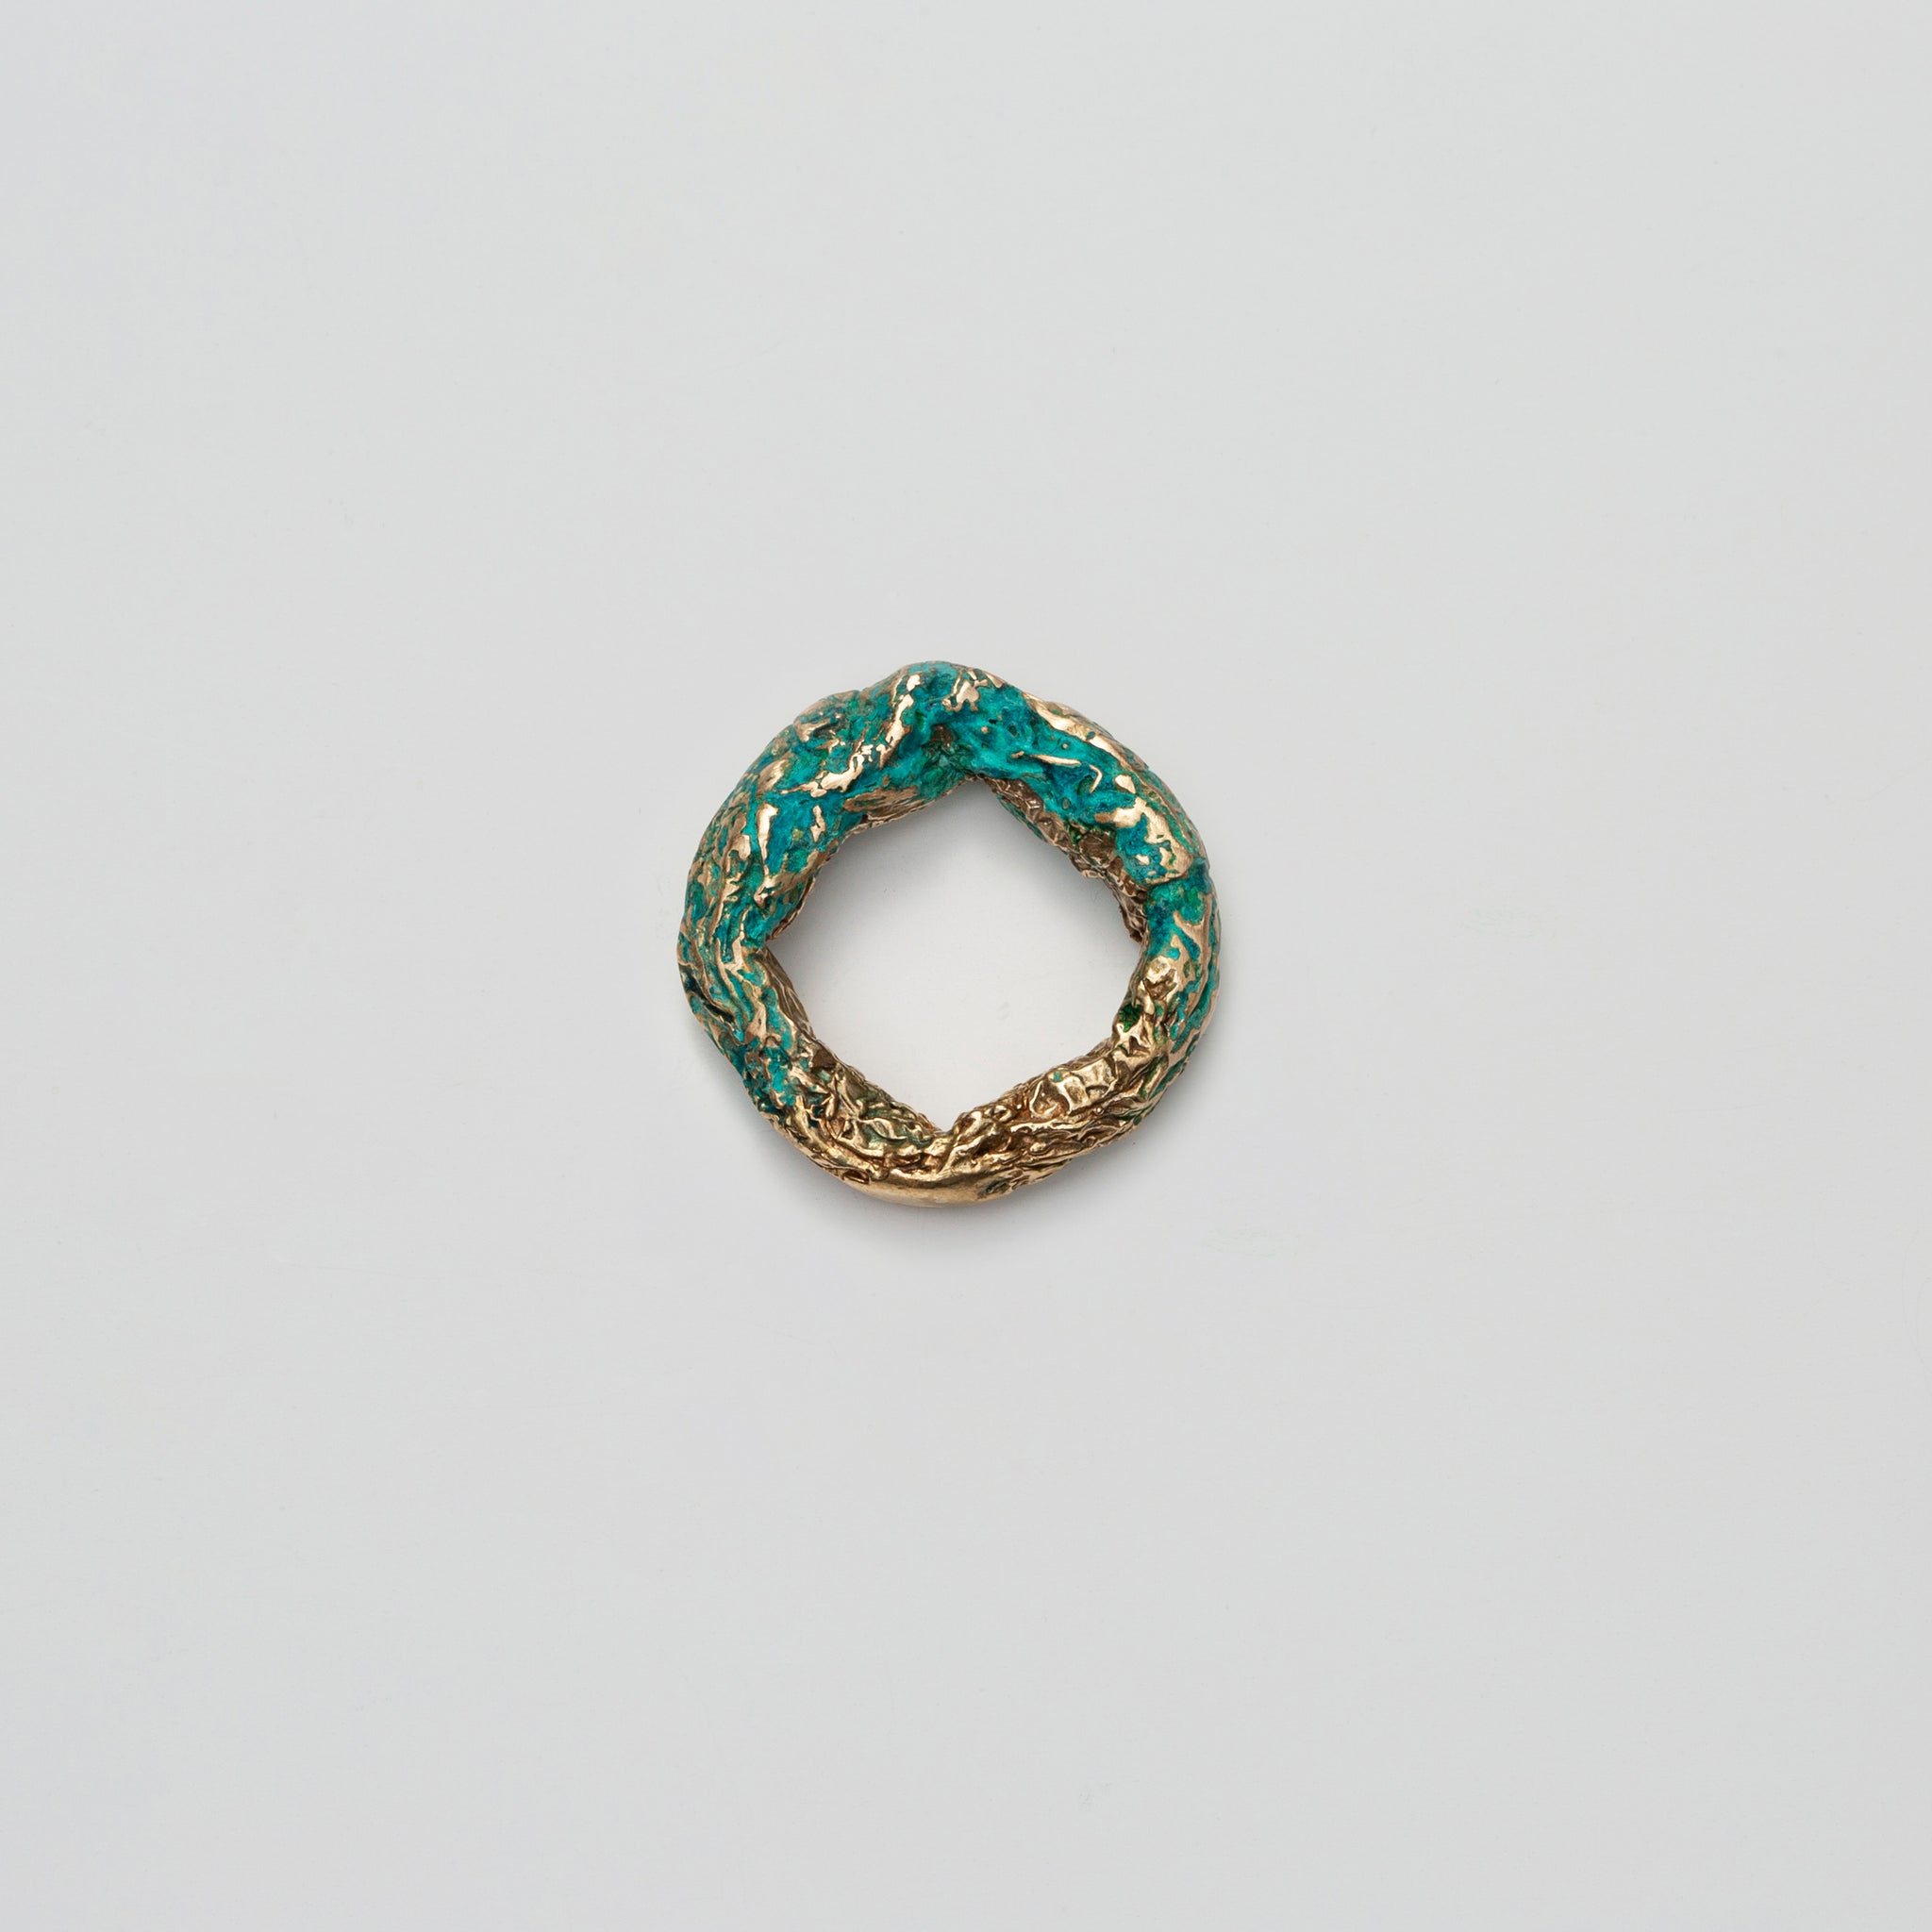 Pressed Ring in Turqoise Oxidized Bronze